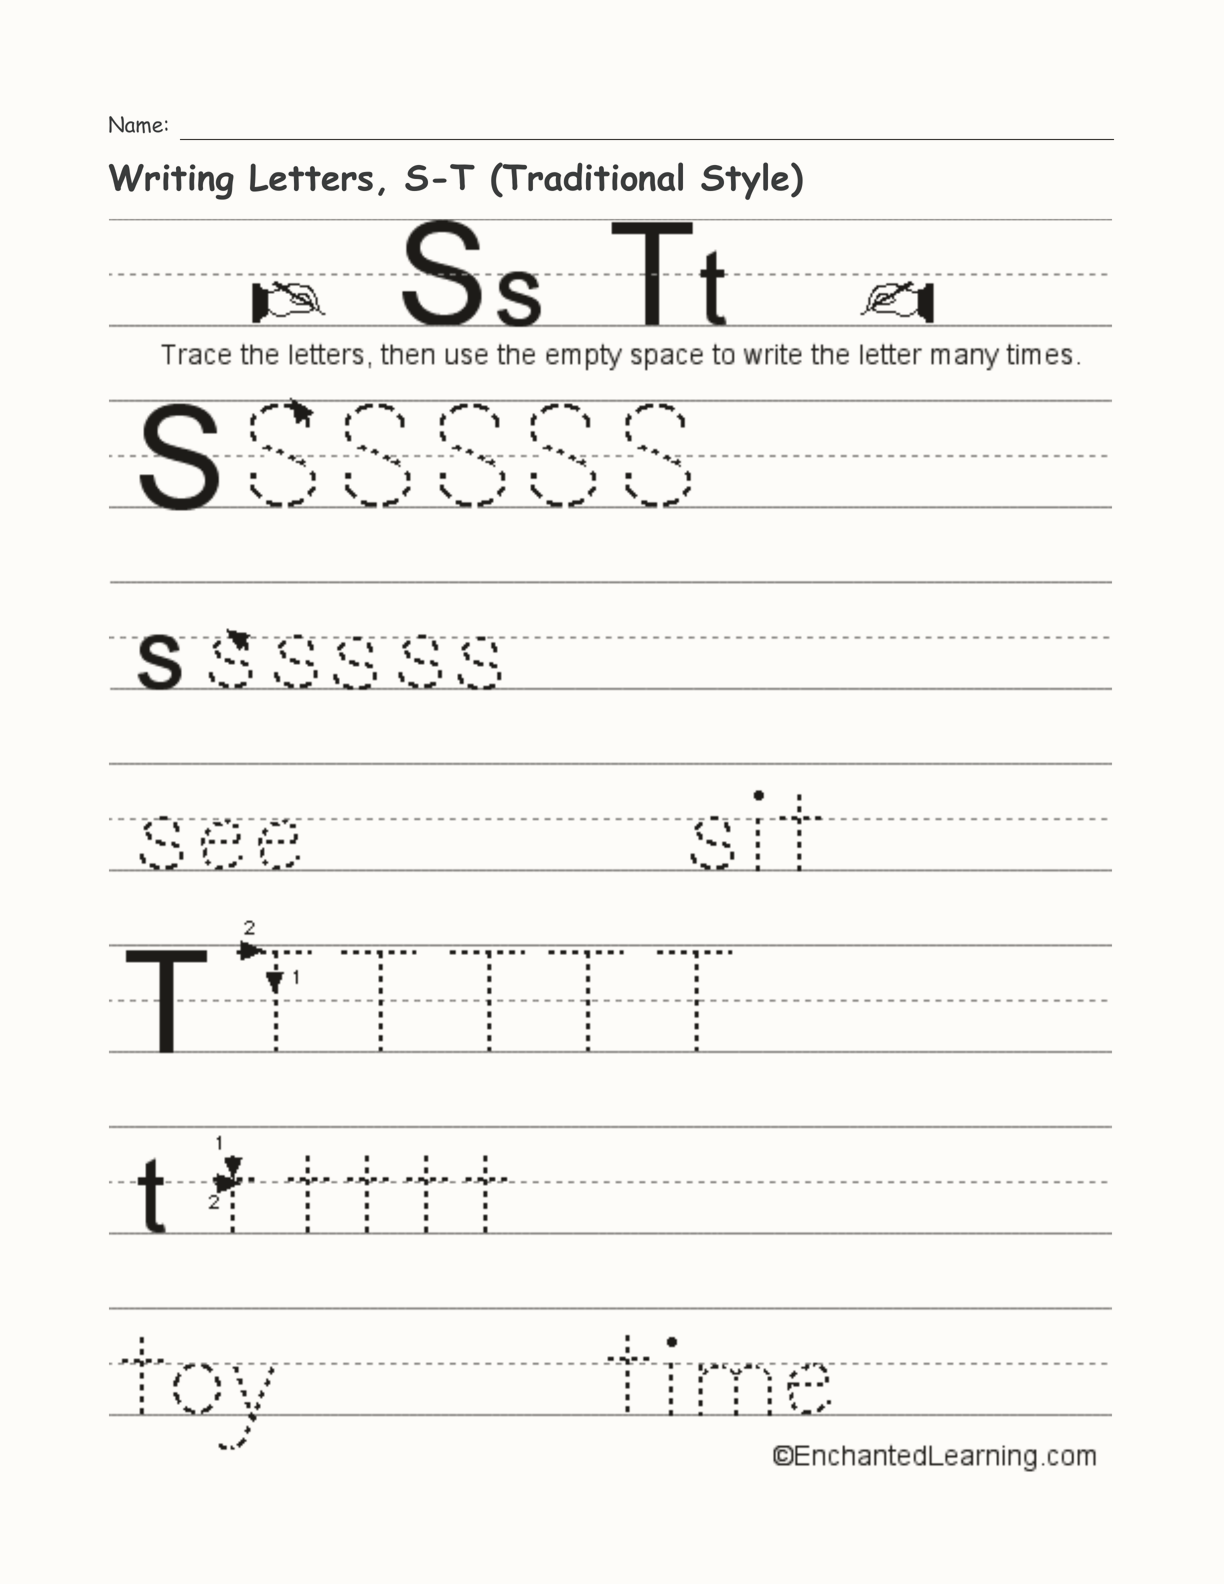 Writing Letters, S-T (Traditional Style) interactive worksheet page 1